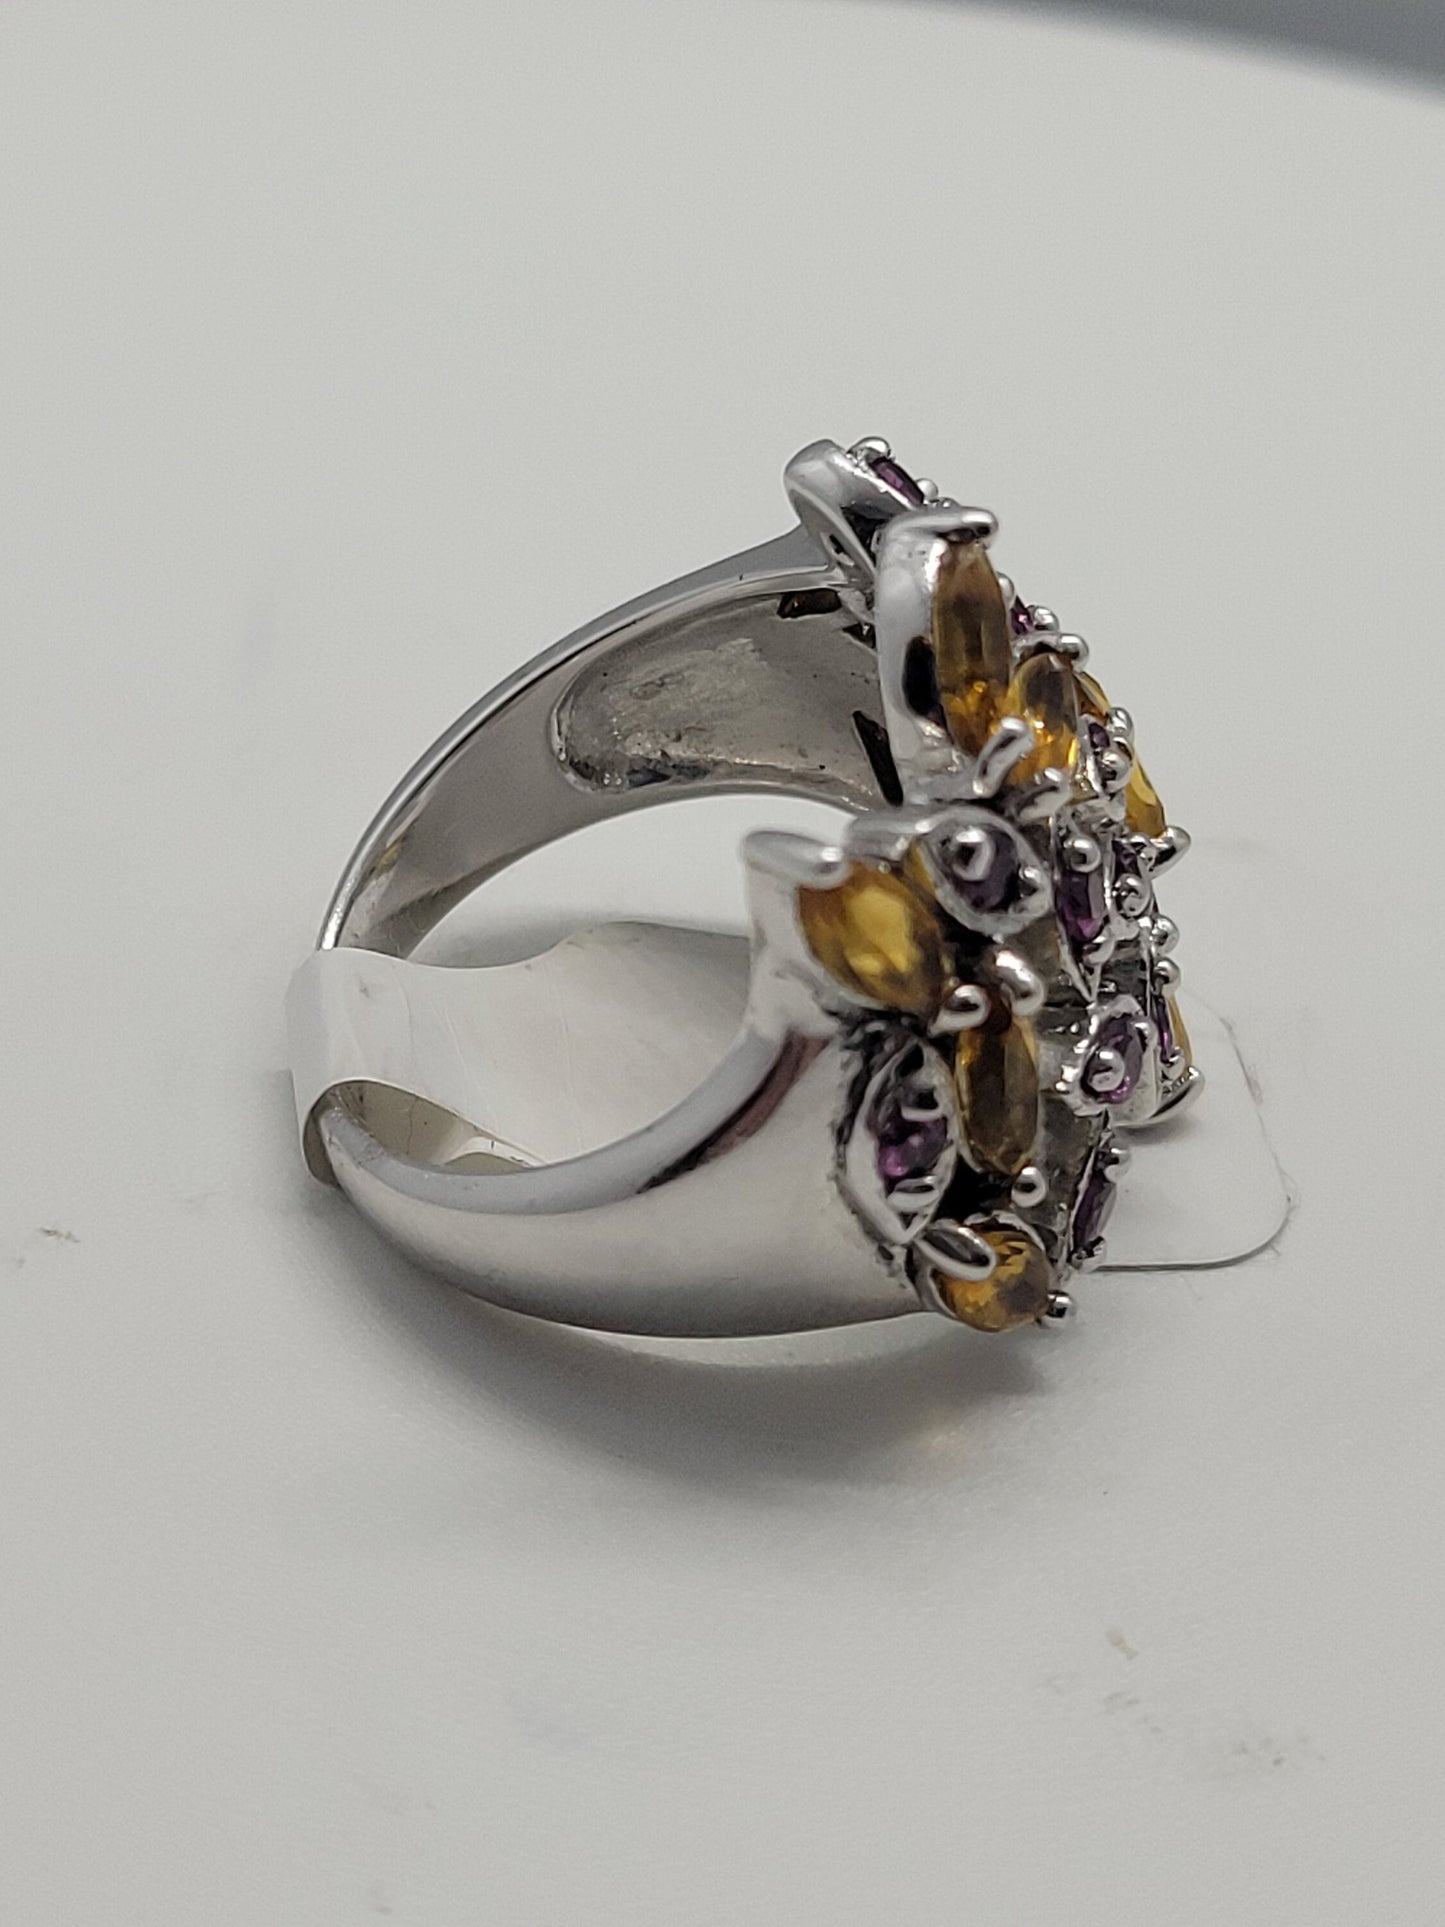 Vintage Yellow Citrine and Purple Amethyst Ring set in 925 Sterling Silver